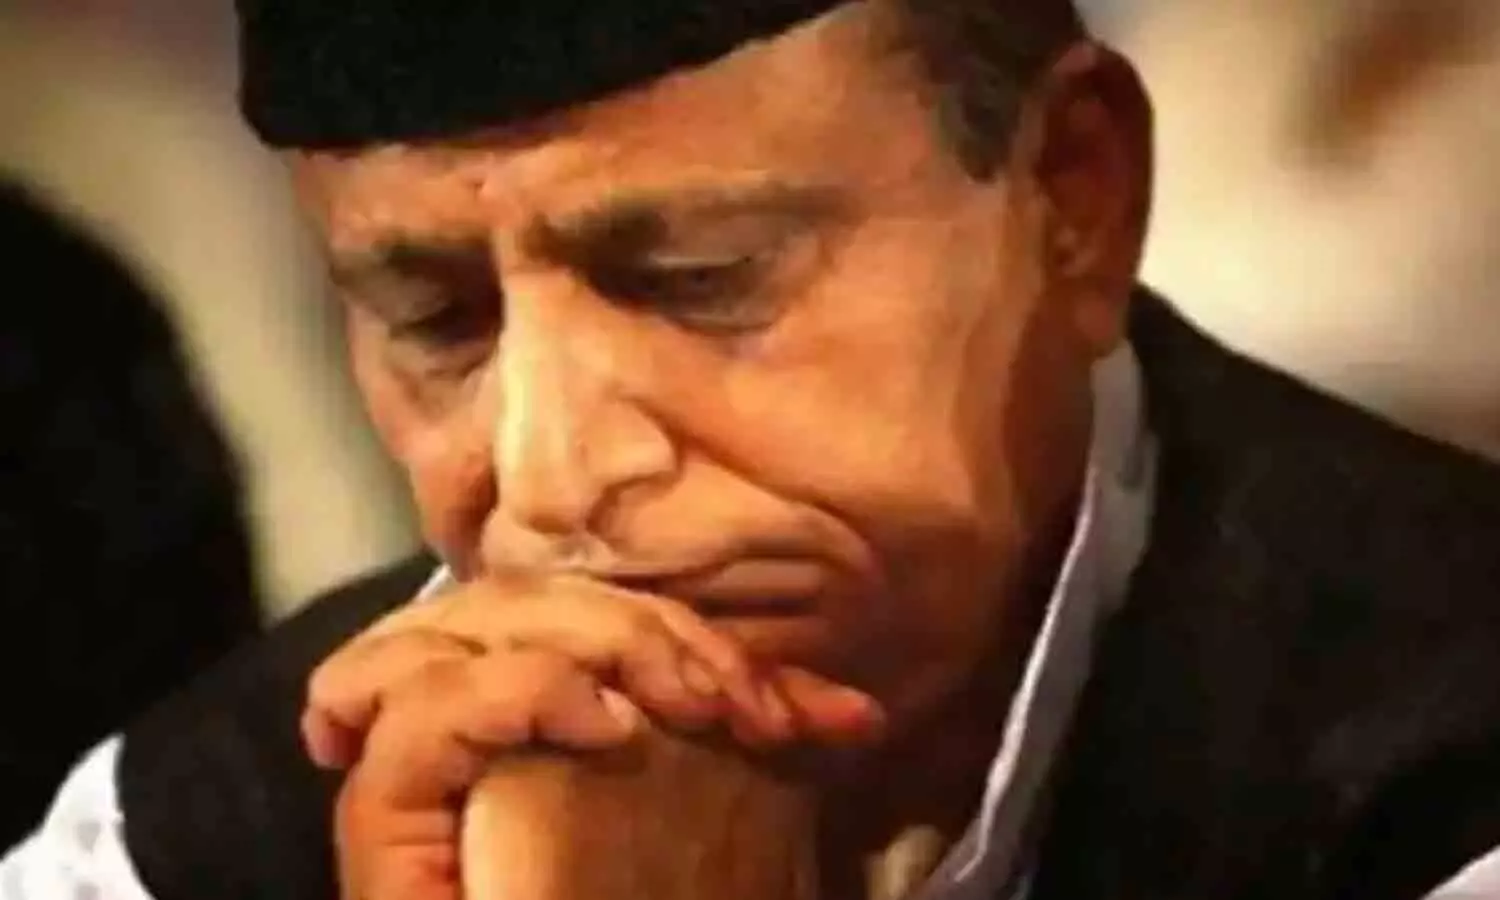 sp leader azam khan did not get bail high court decision reserved the verdict